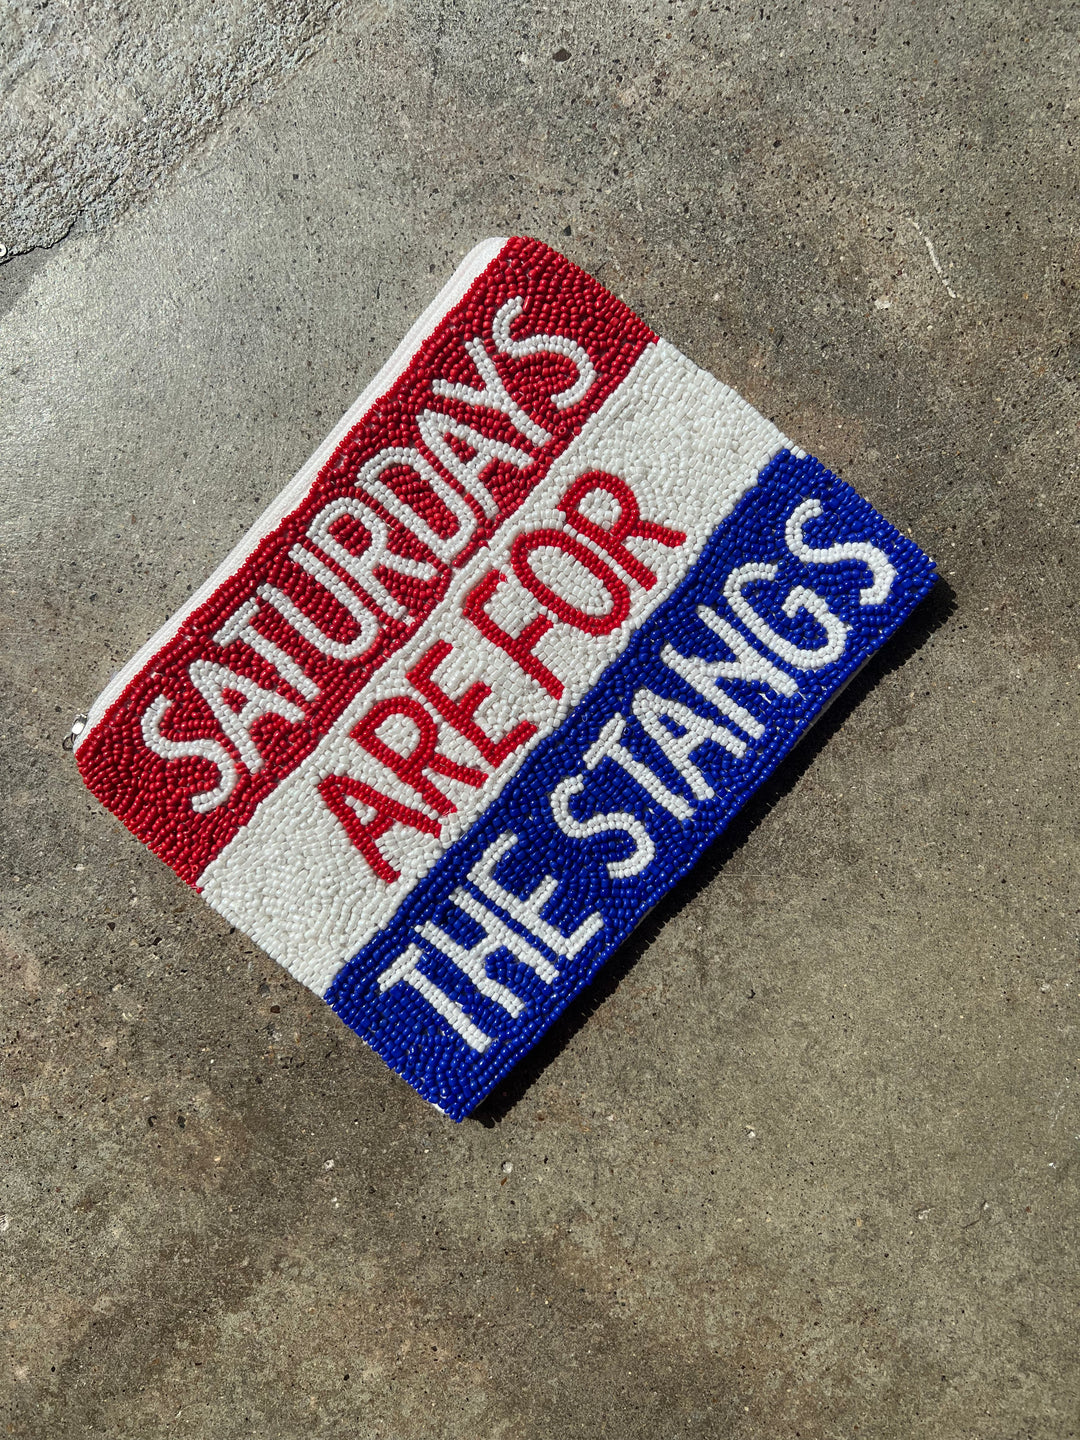 Saturdays Are For The Stangs Pouch, Purses, Adeline, Adeline, dallas boutique, dallas texas, texas boutique, women's boutique dallas, adeline boutique, dallas boutique, trendy boutique, affordable boutique